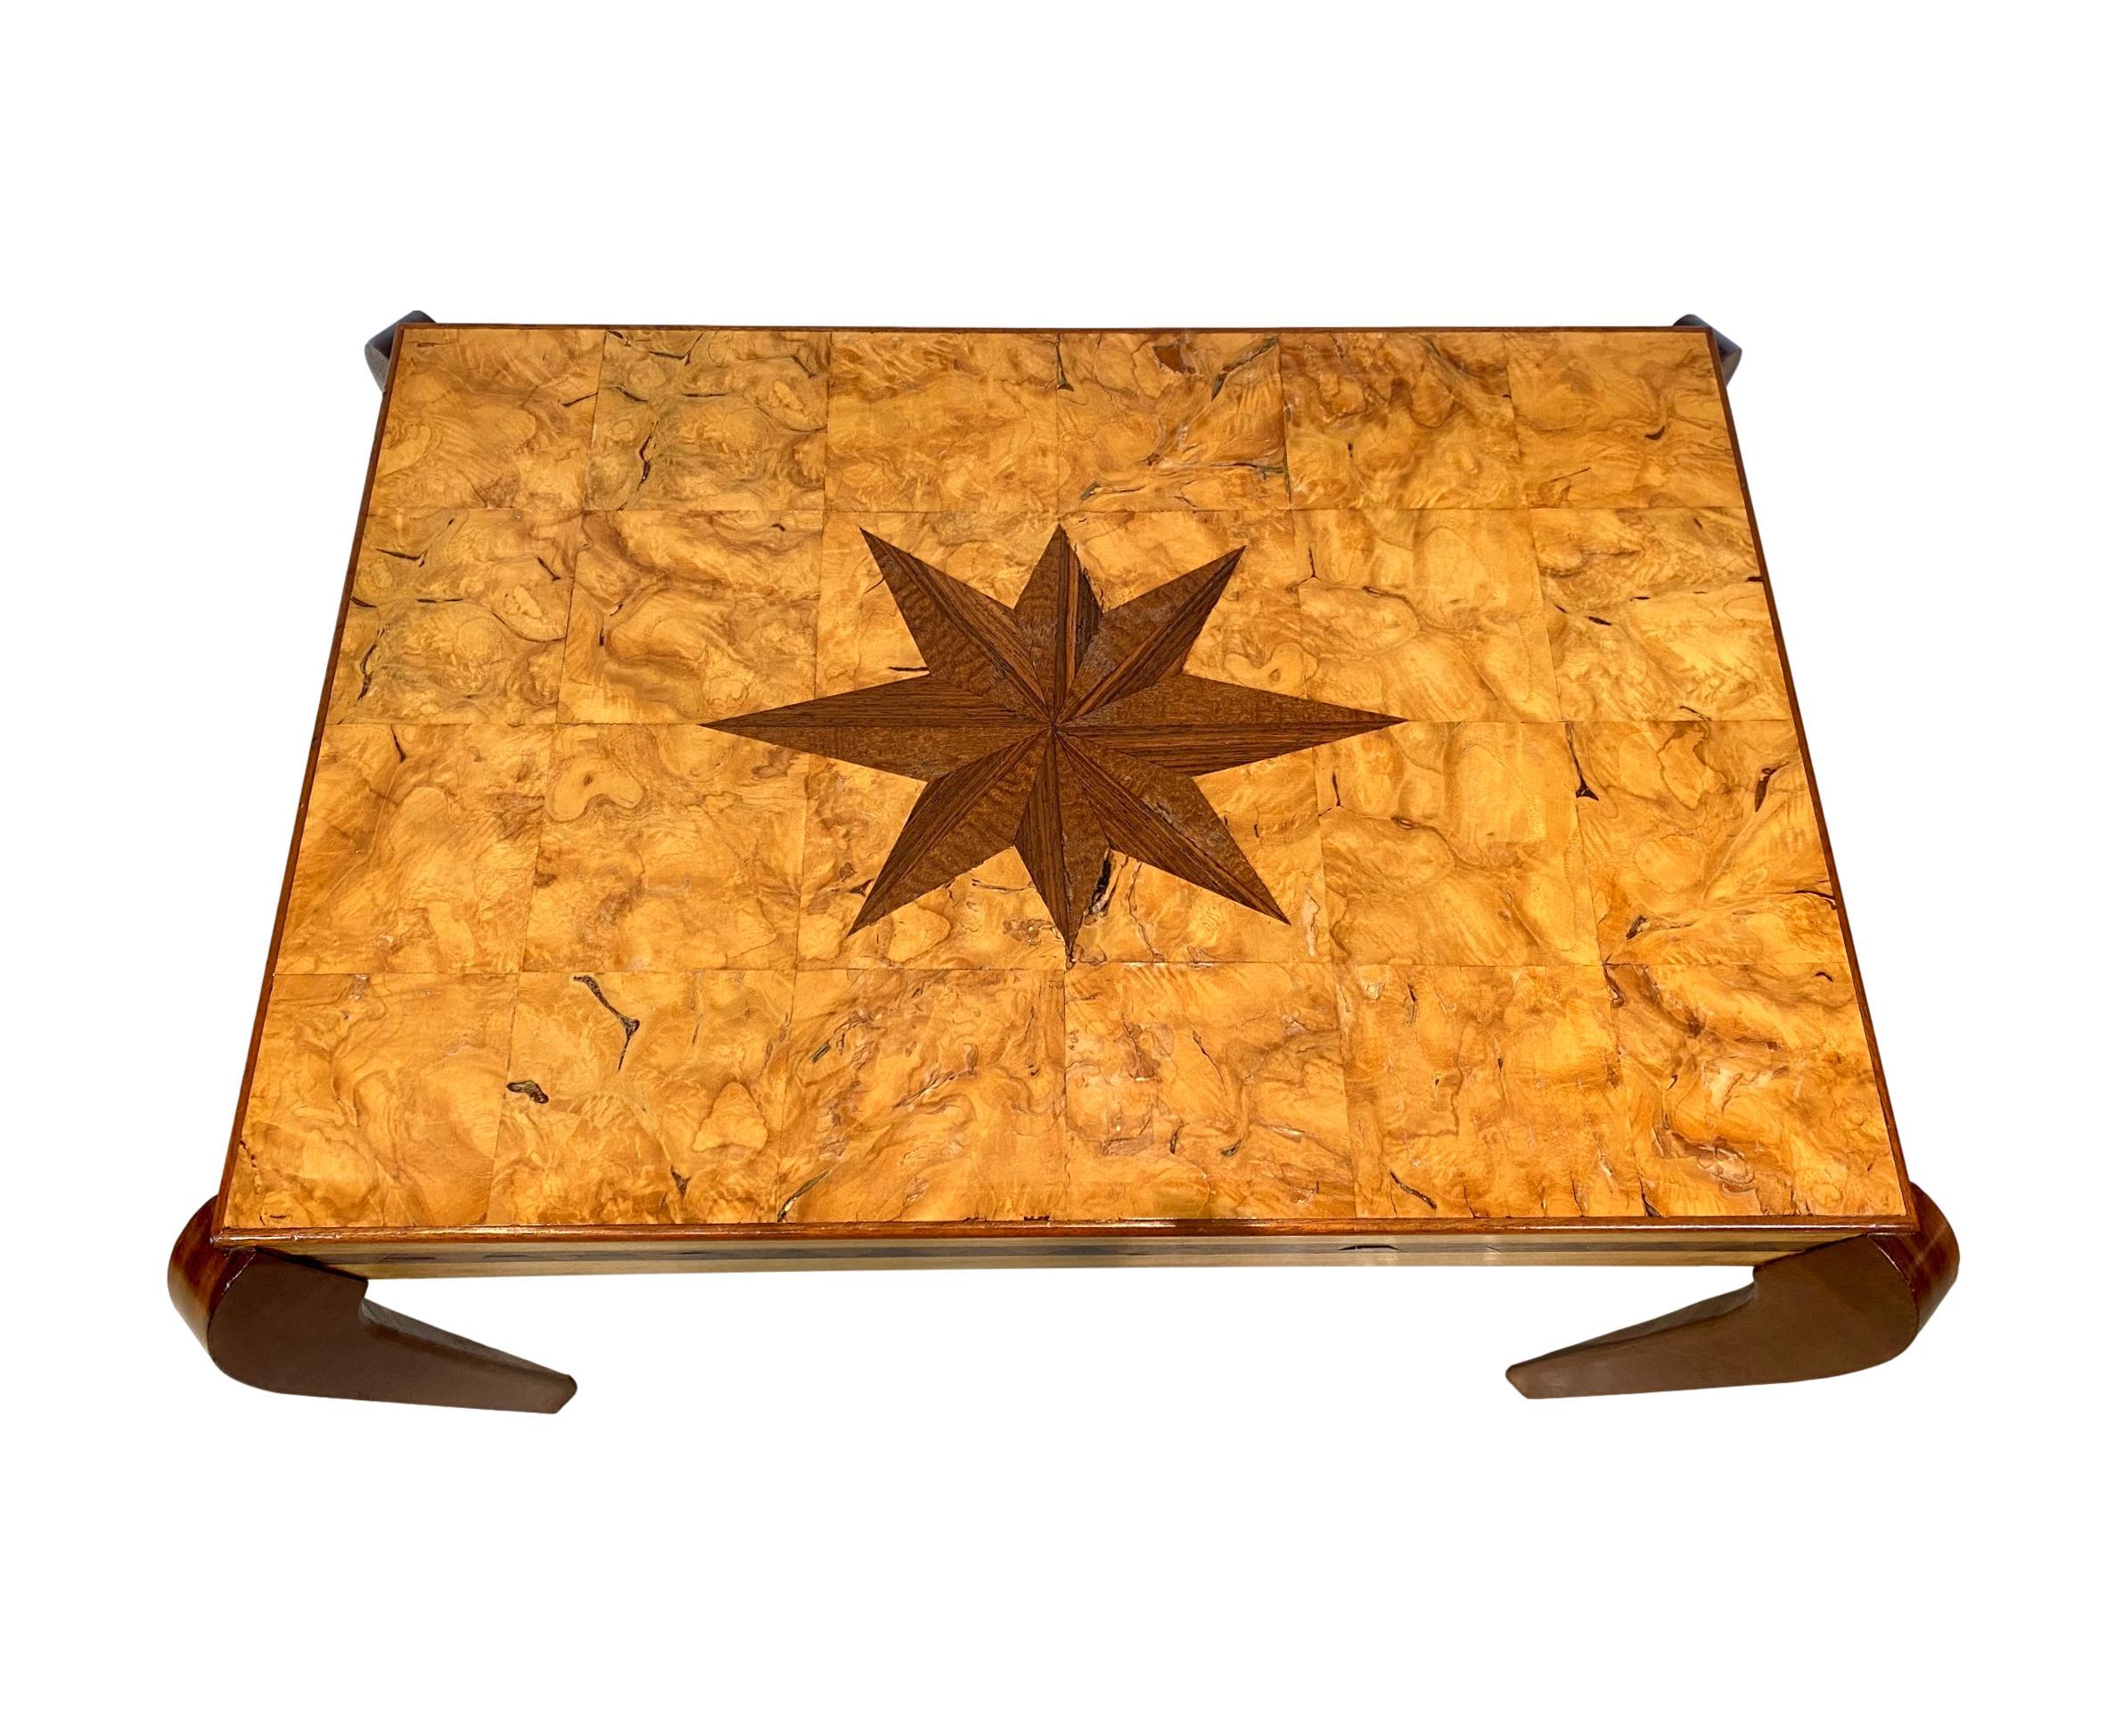 Late 20th Century Mid-Century Modern Inlaid Center Table in Exotic Woods with Compass Star, 1996